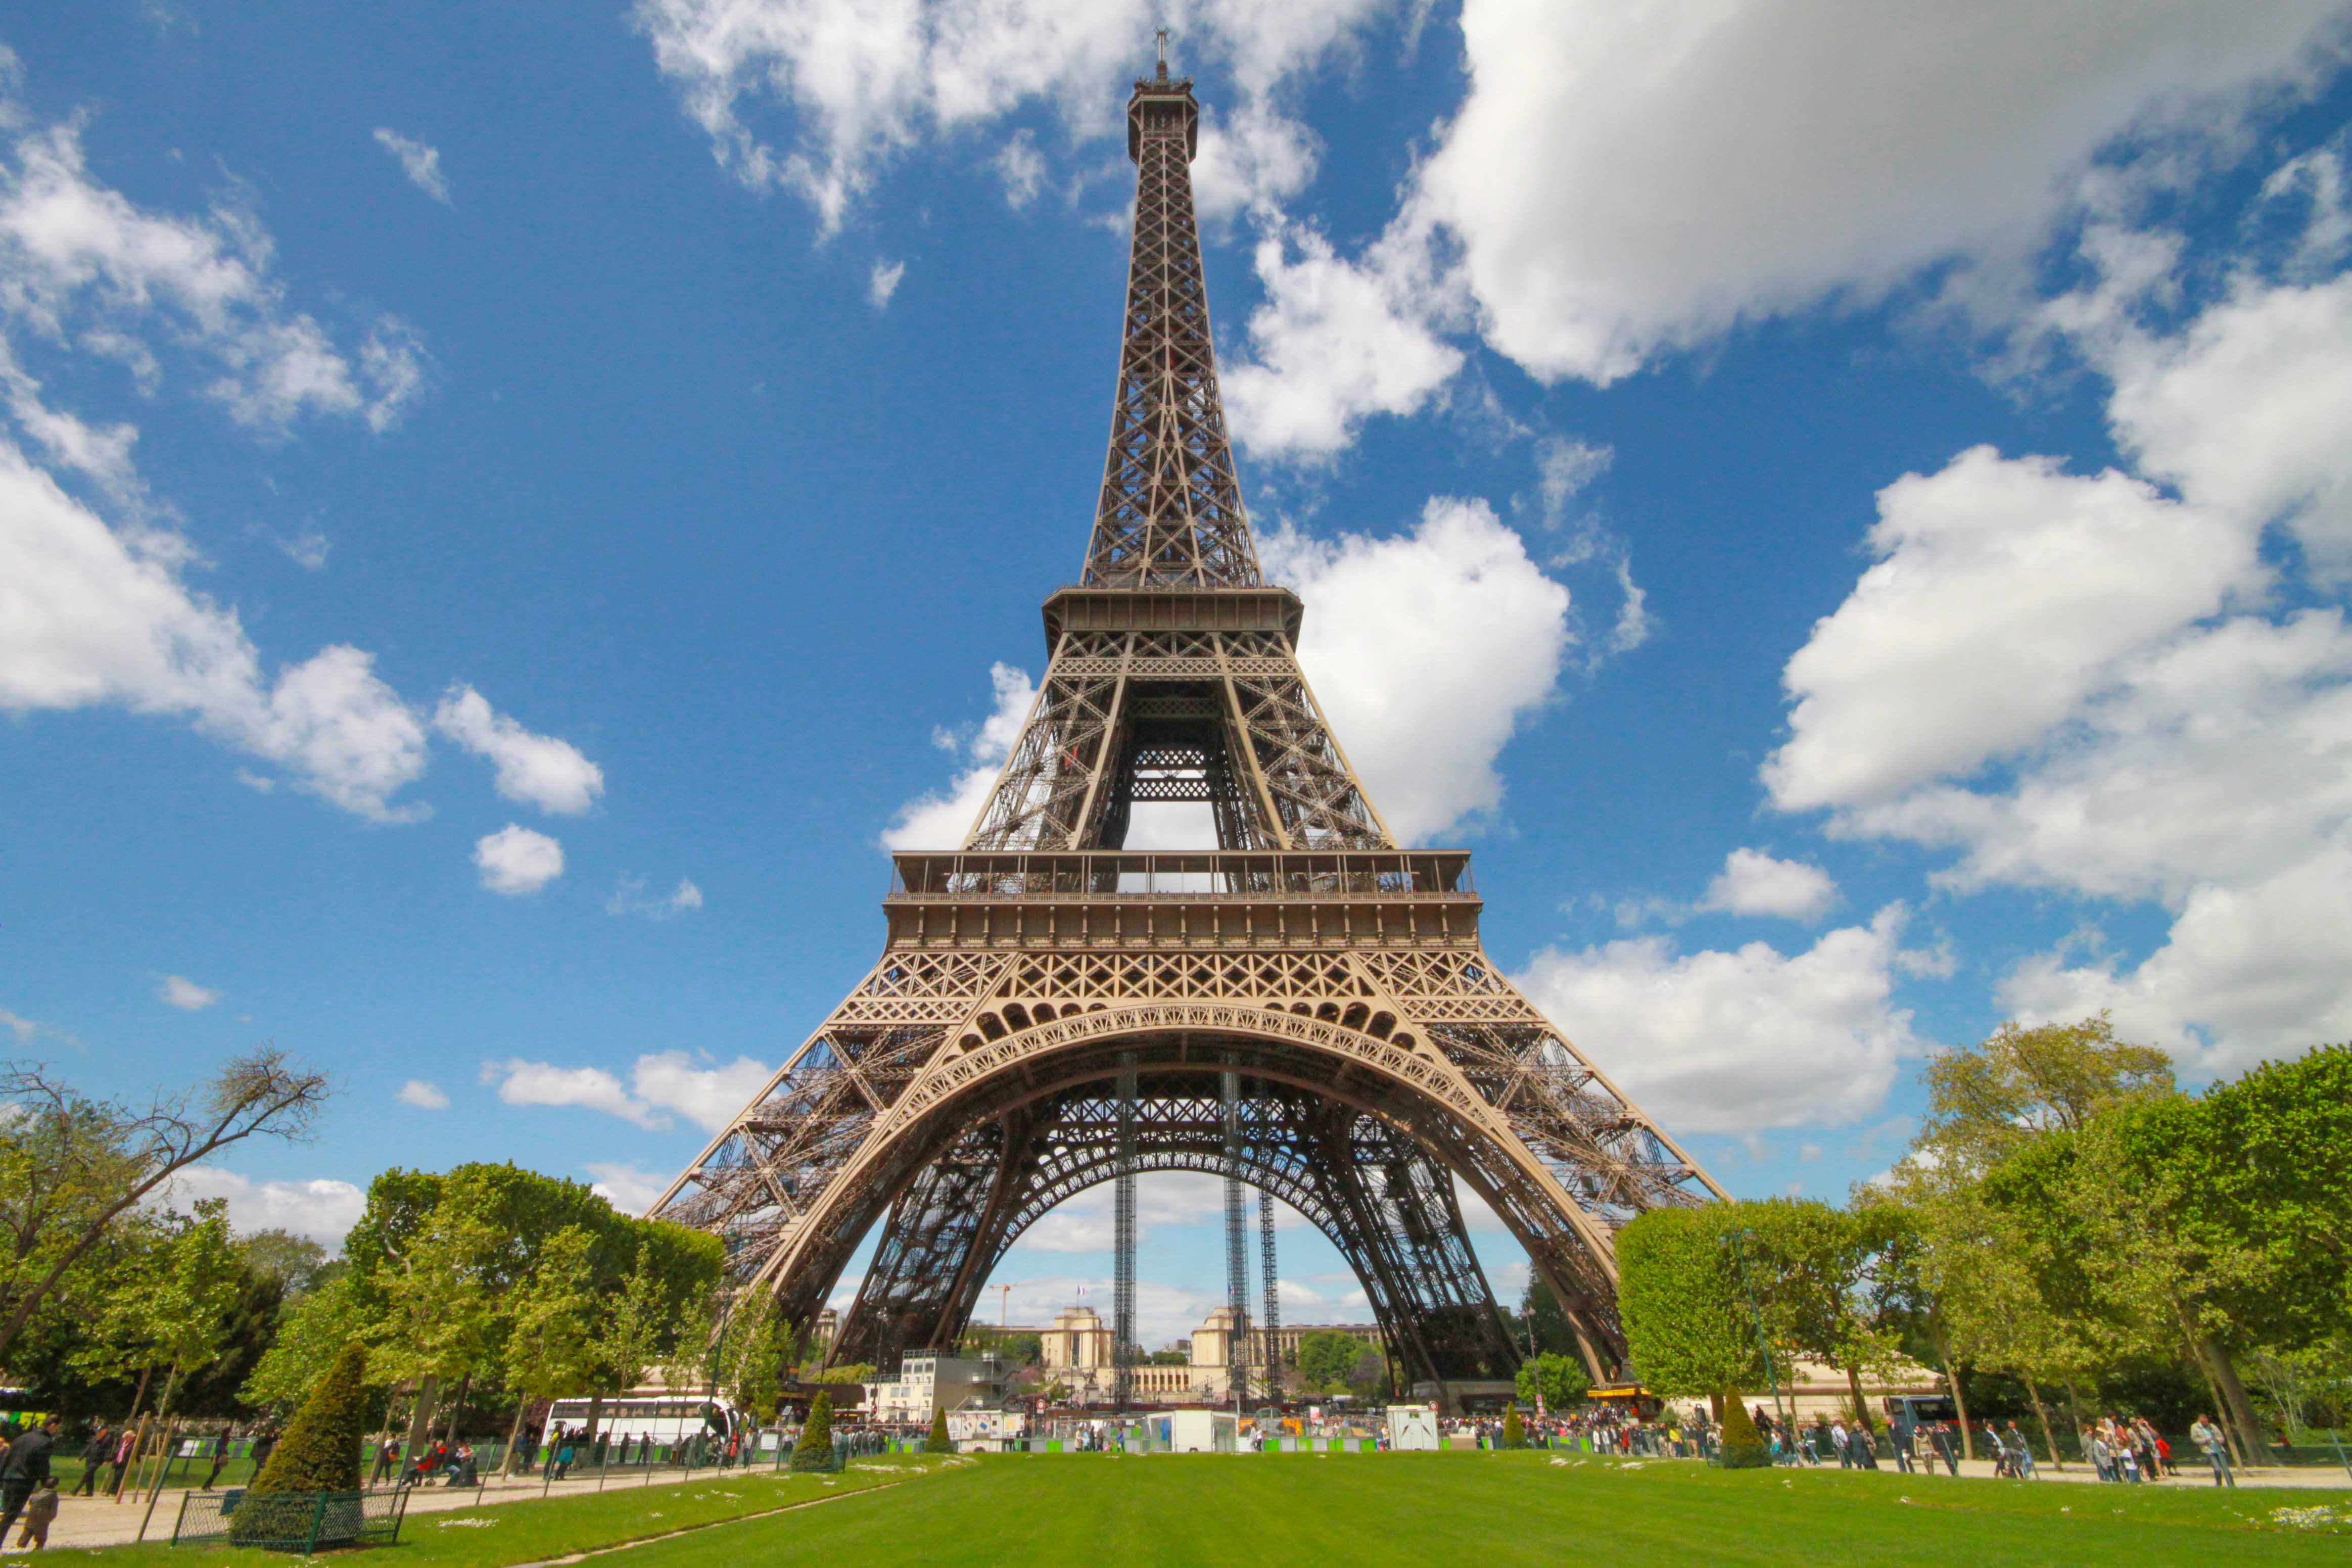 my trip to paris essay in french